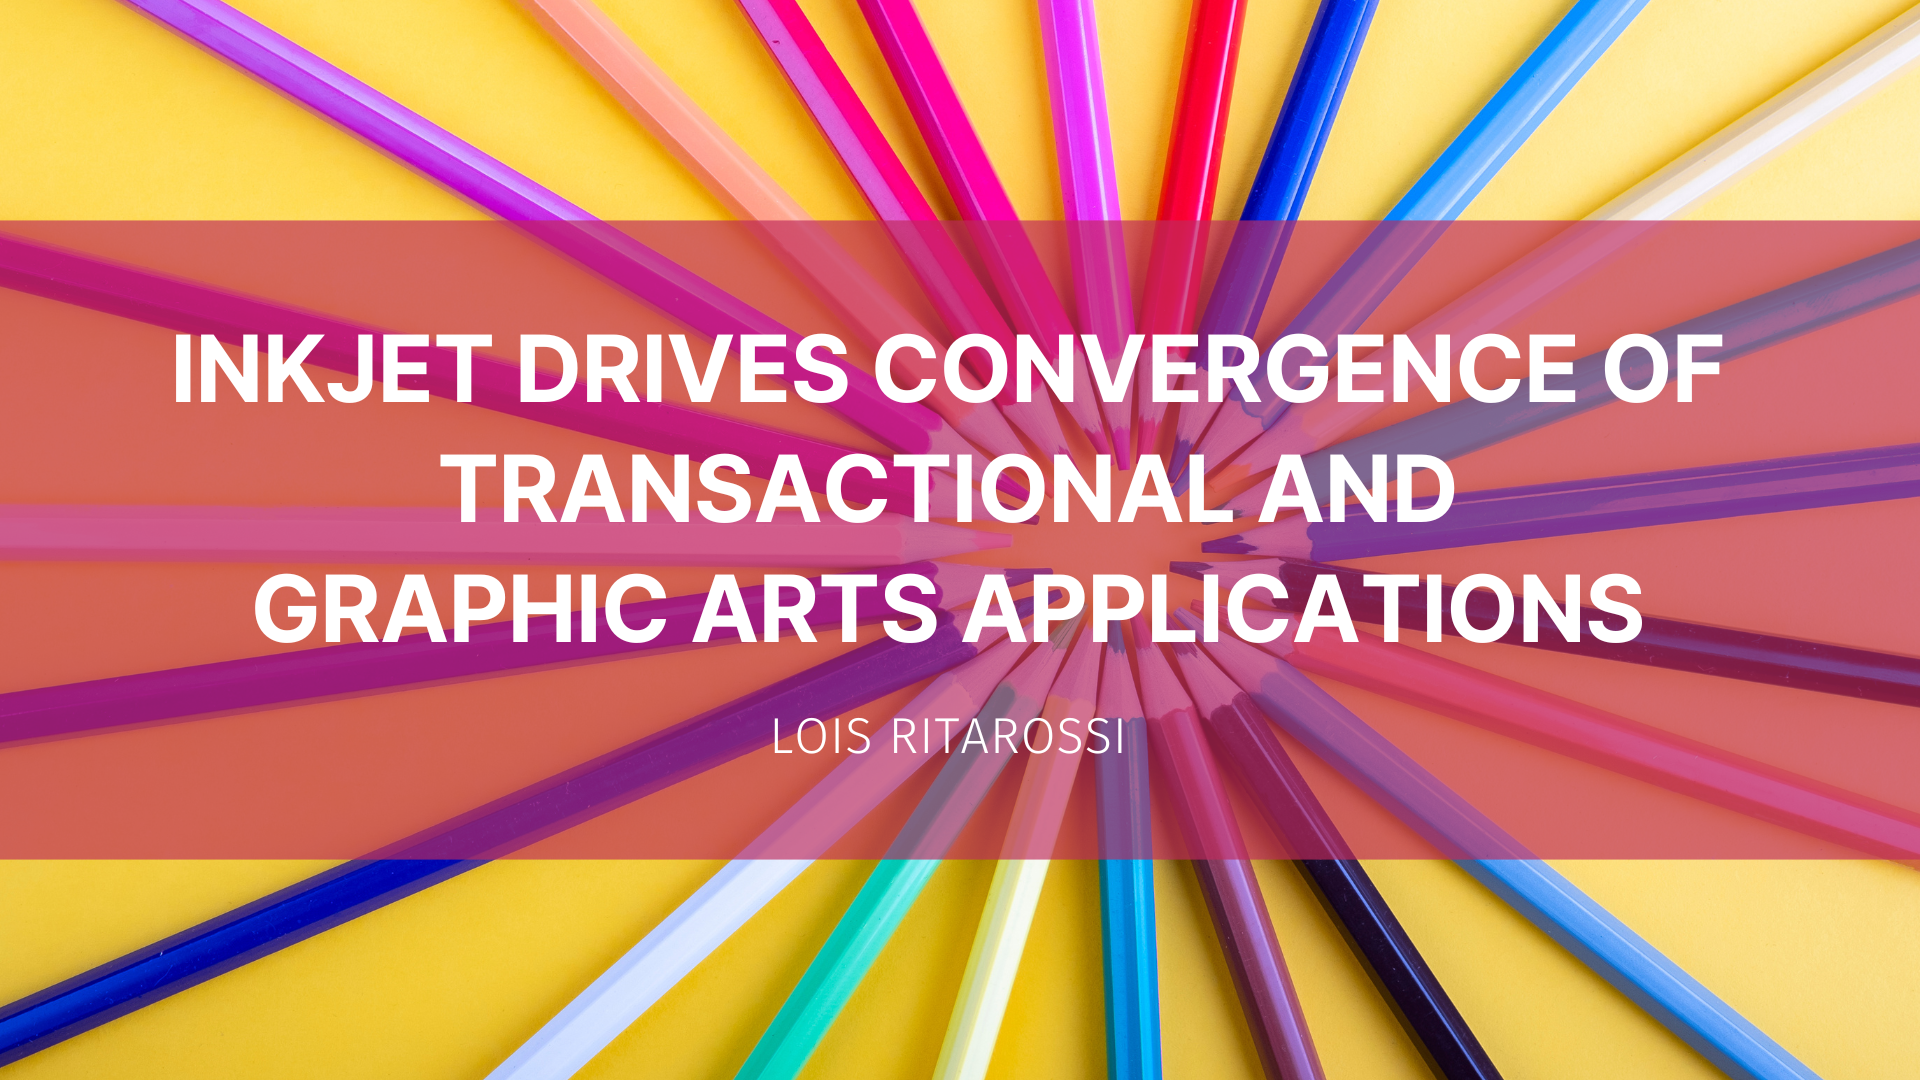 Featured image for “Inkjet drives convergence of transactional and graphic arts applications”